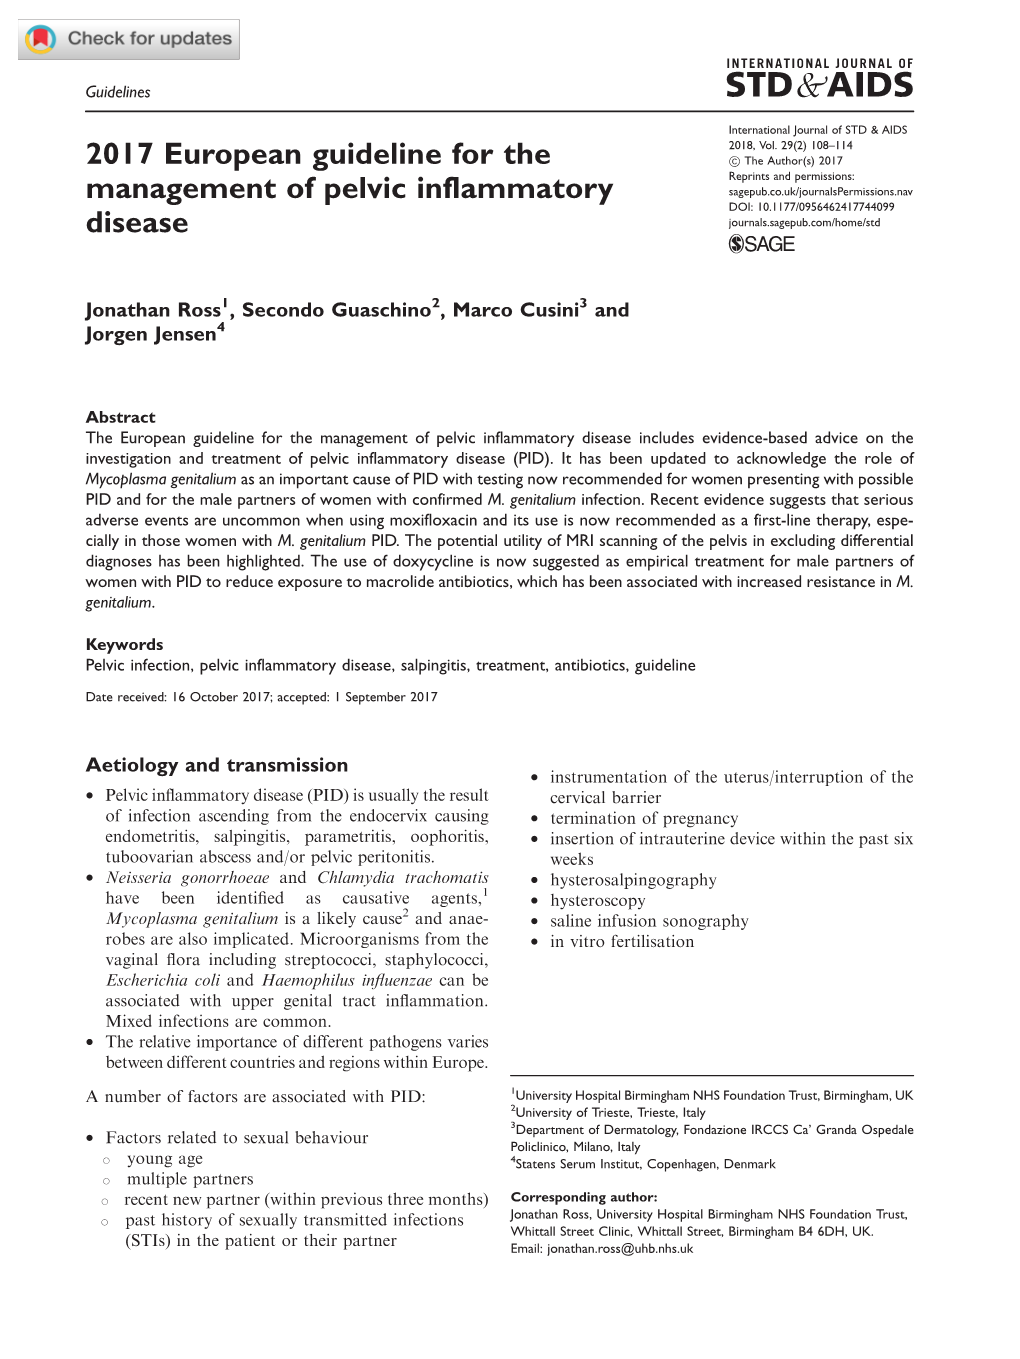 2017 European Guideline for the Management of Pelvic Inflammatory